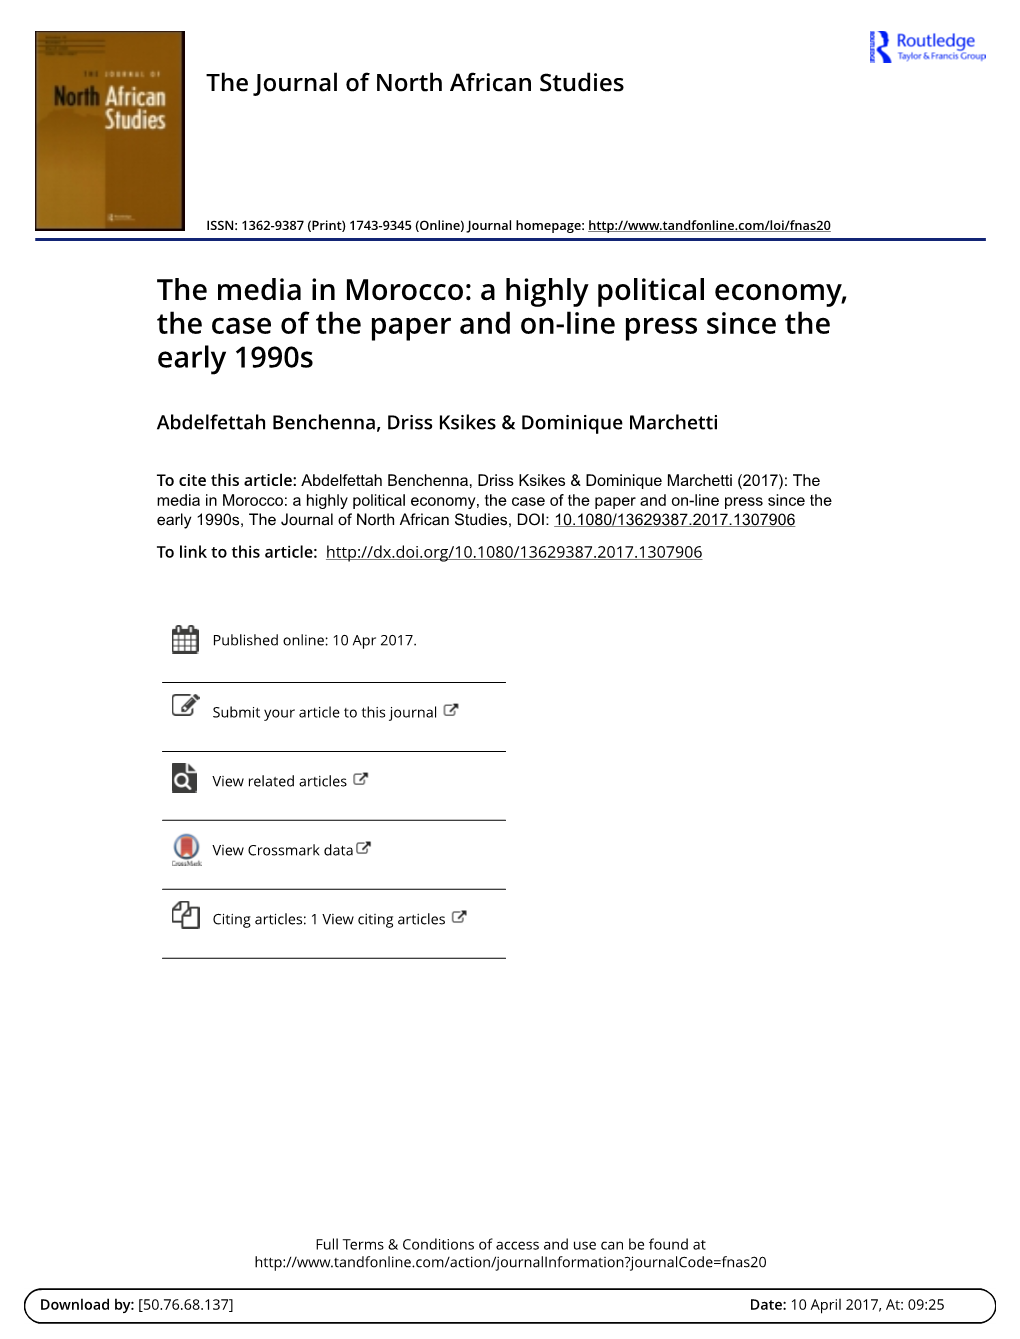 A Highly Political Economy, the Case of the Paper and On-Line Press Since the Early 1990S